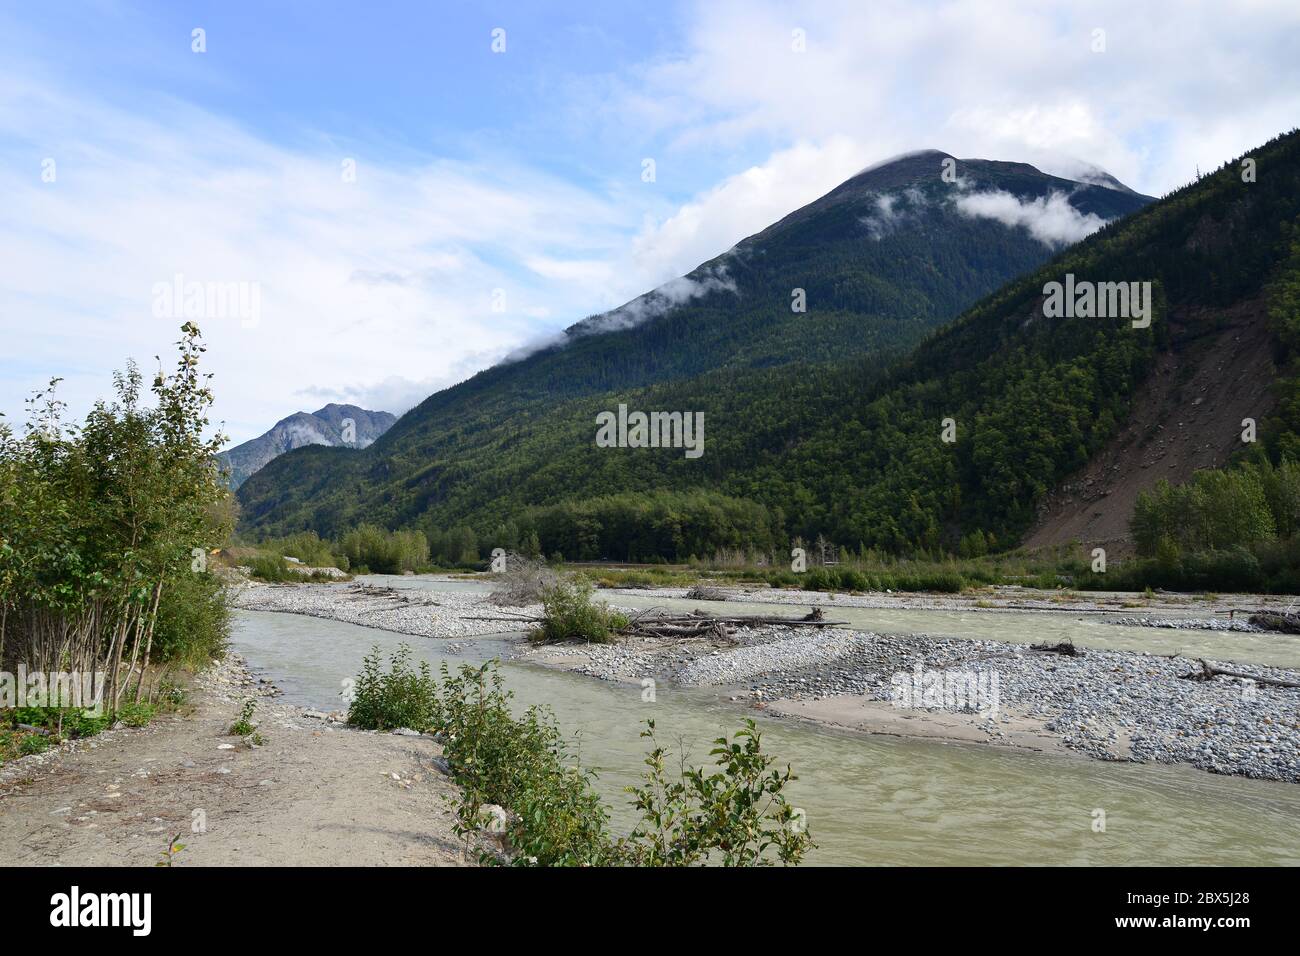 Dyea river, Taiya River, in Skagway, there may have been 'gold in them thar hills' but most of it was found in the river sediments. A tourist attracti Stock Photo